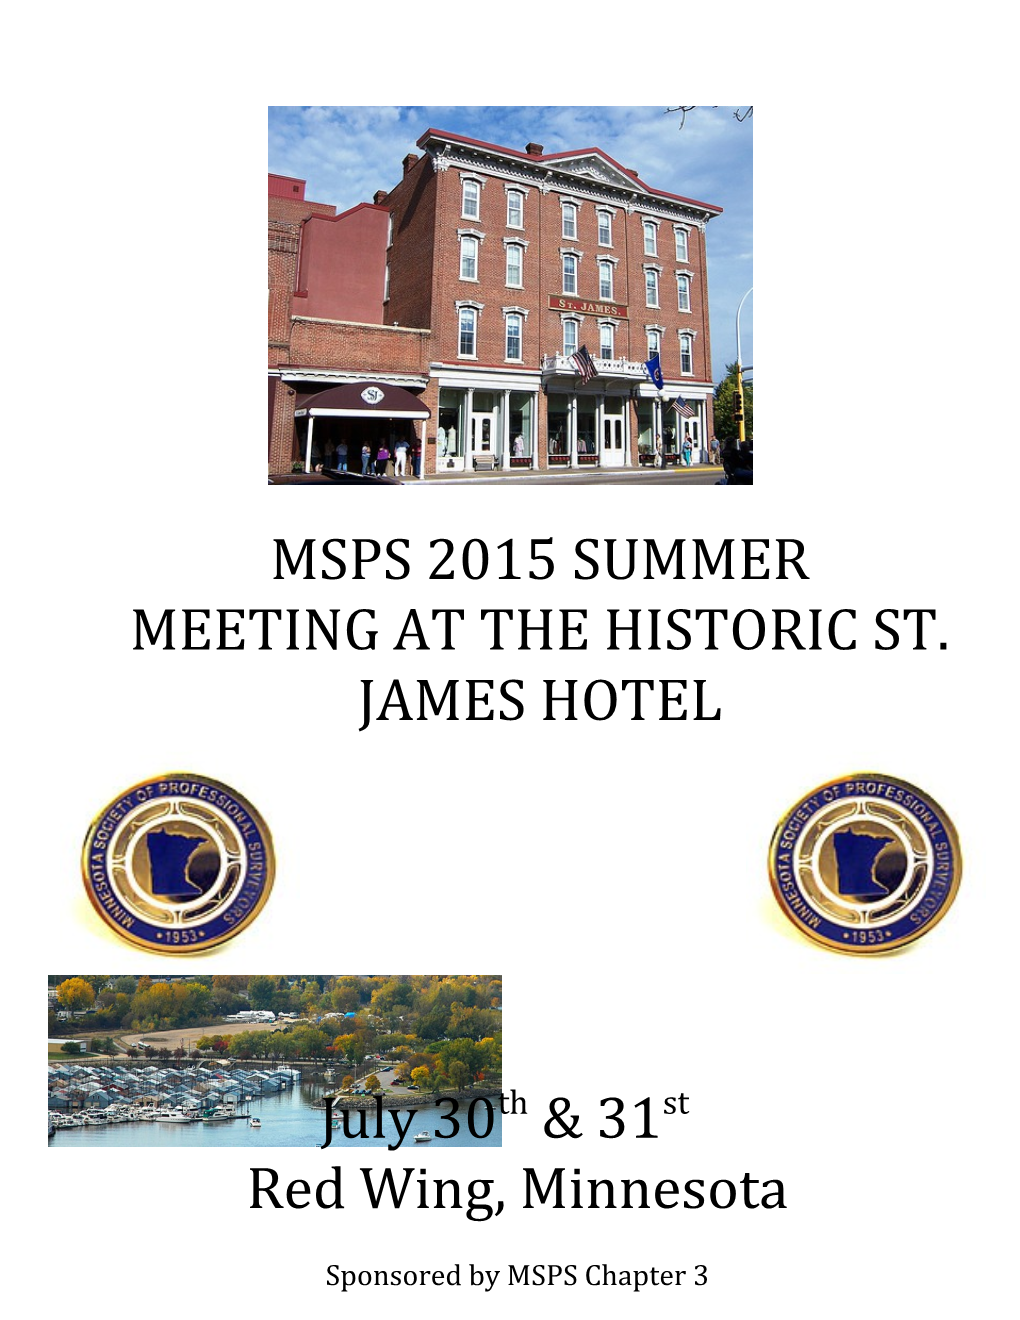 Red Wing, Minnesota Will Be Host to the 2015 MSPS Summer Meeting